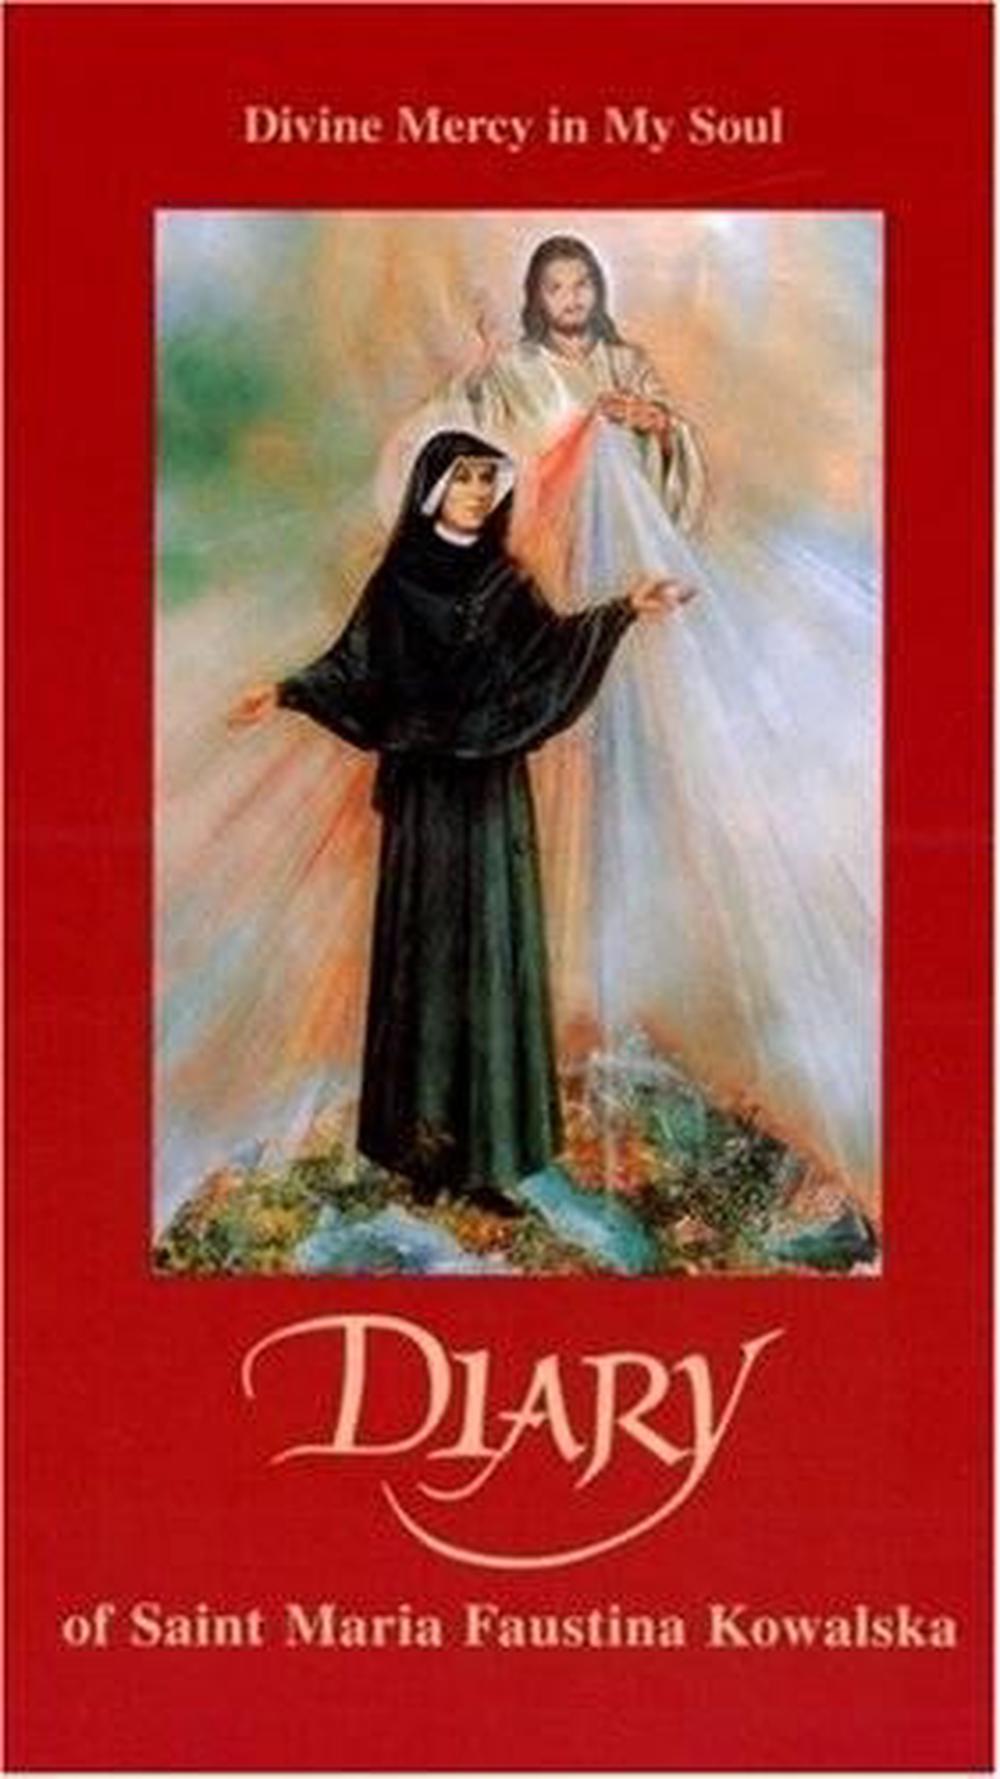 Diary of Saint Maria Faustina Kowalska Divine Mercy in My Soul by